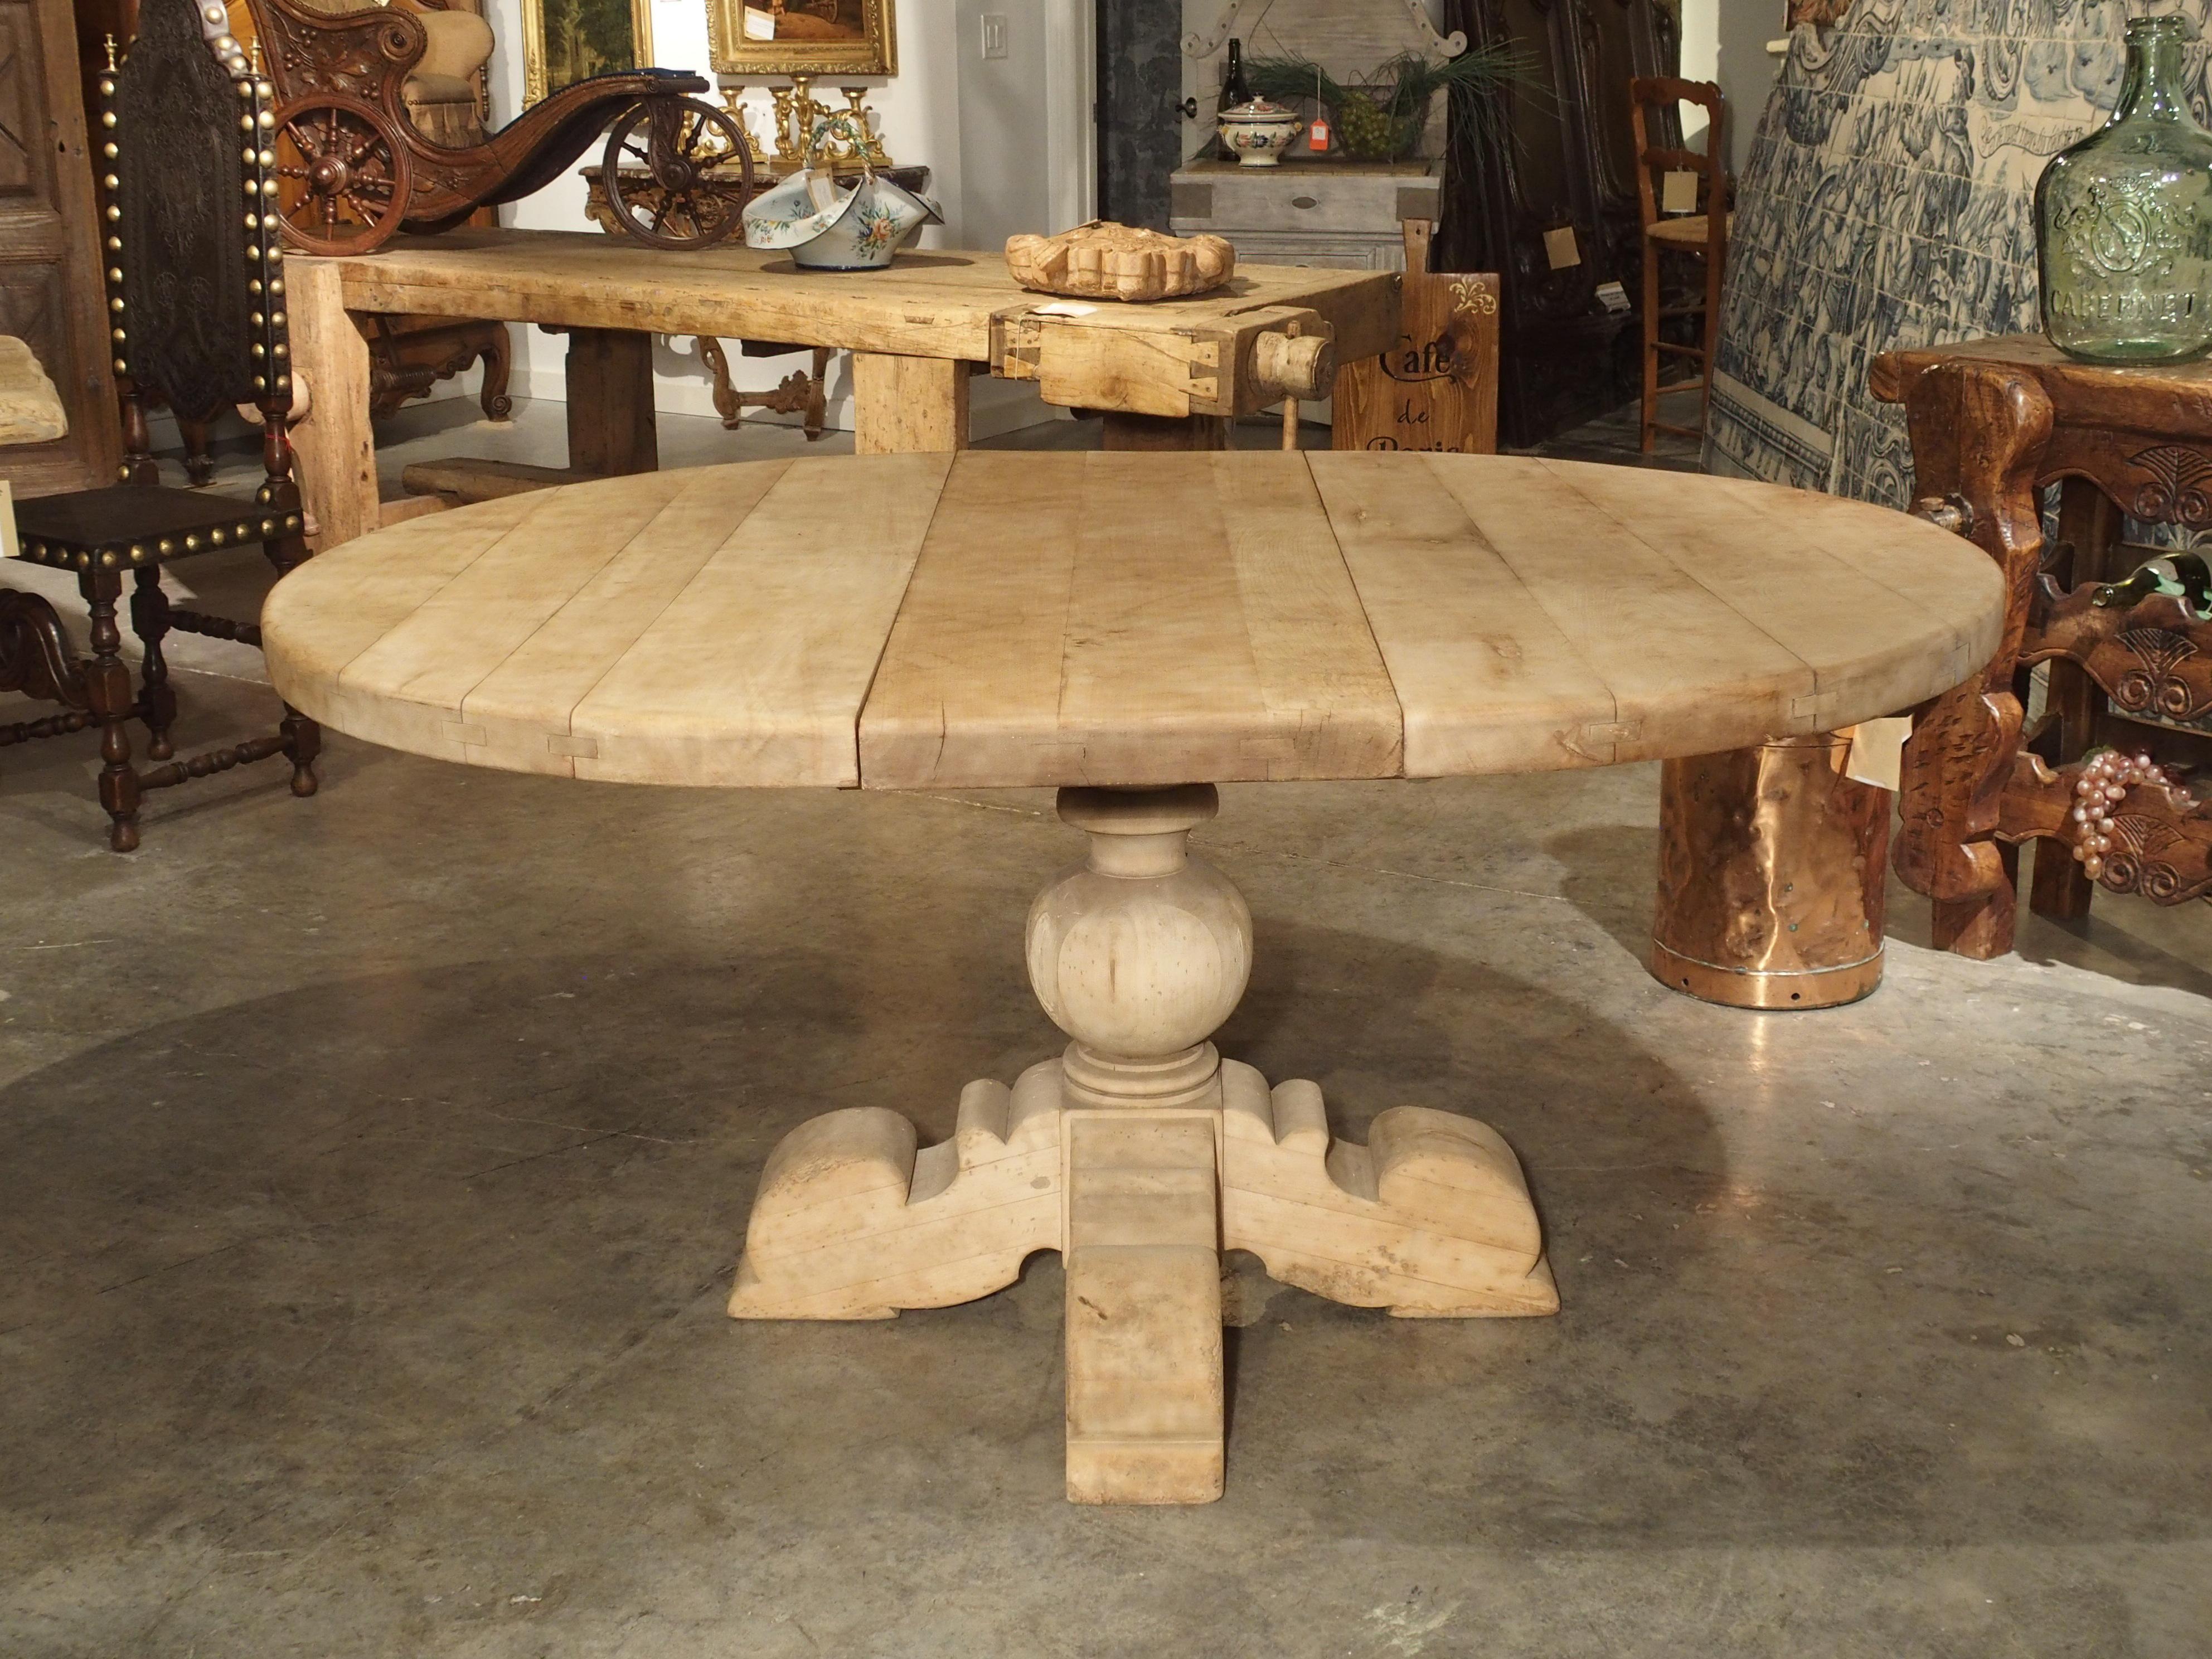 This interesting bleached table was produced in the early to mid-20th century in Belgium. The two-inch-thick top with mortise and Tenon construction is supported by an impressive and stout hand carved base. The columnar base is accentuated by a